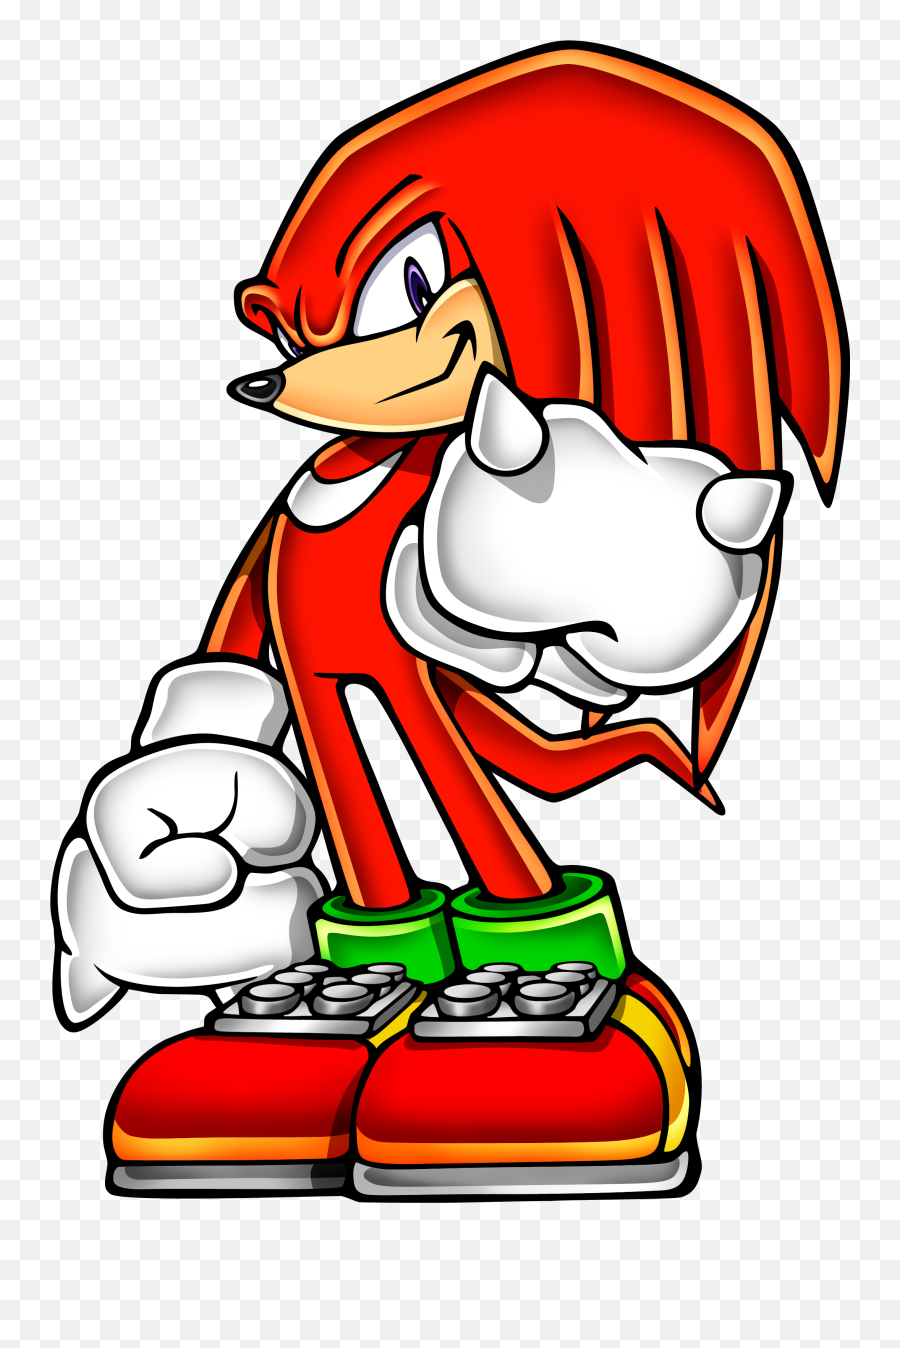 Advance Knuckles Png